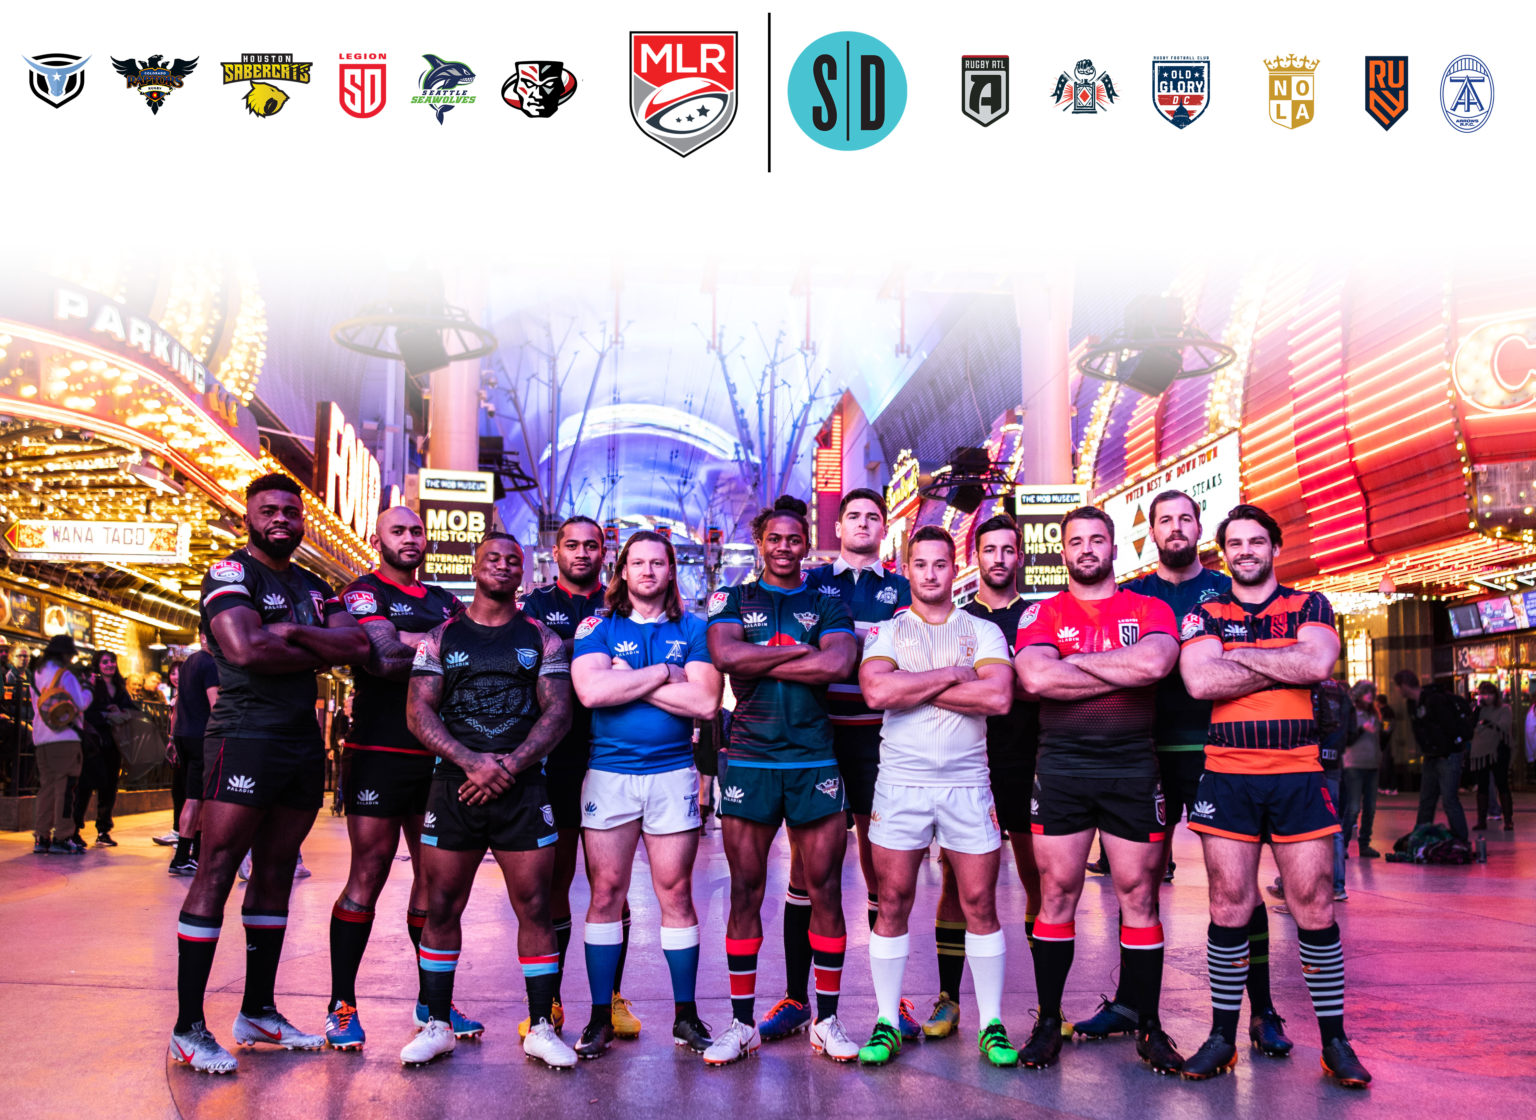 Major League Rugby excited to partner with Sportsdigita NOLA Gold Rugby